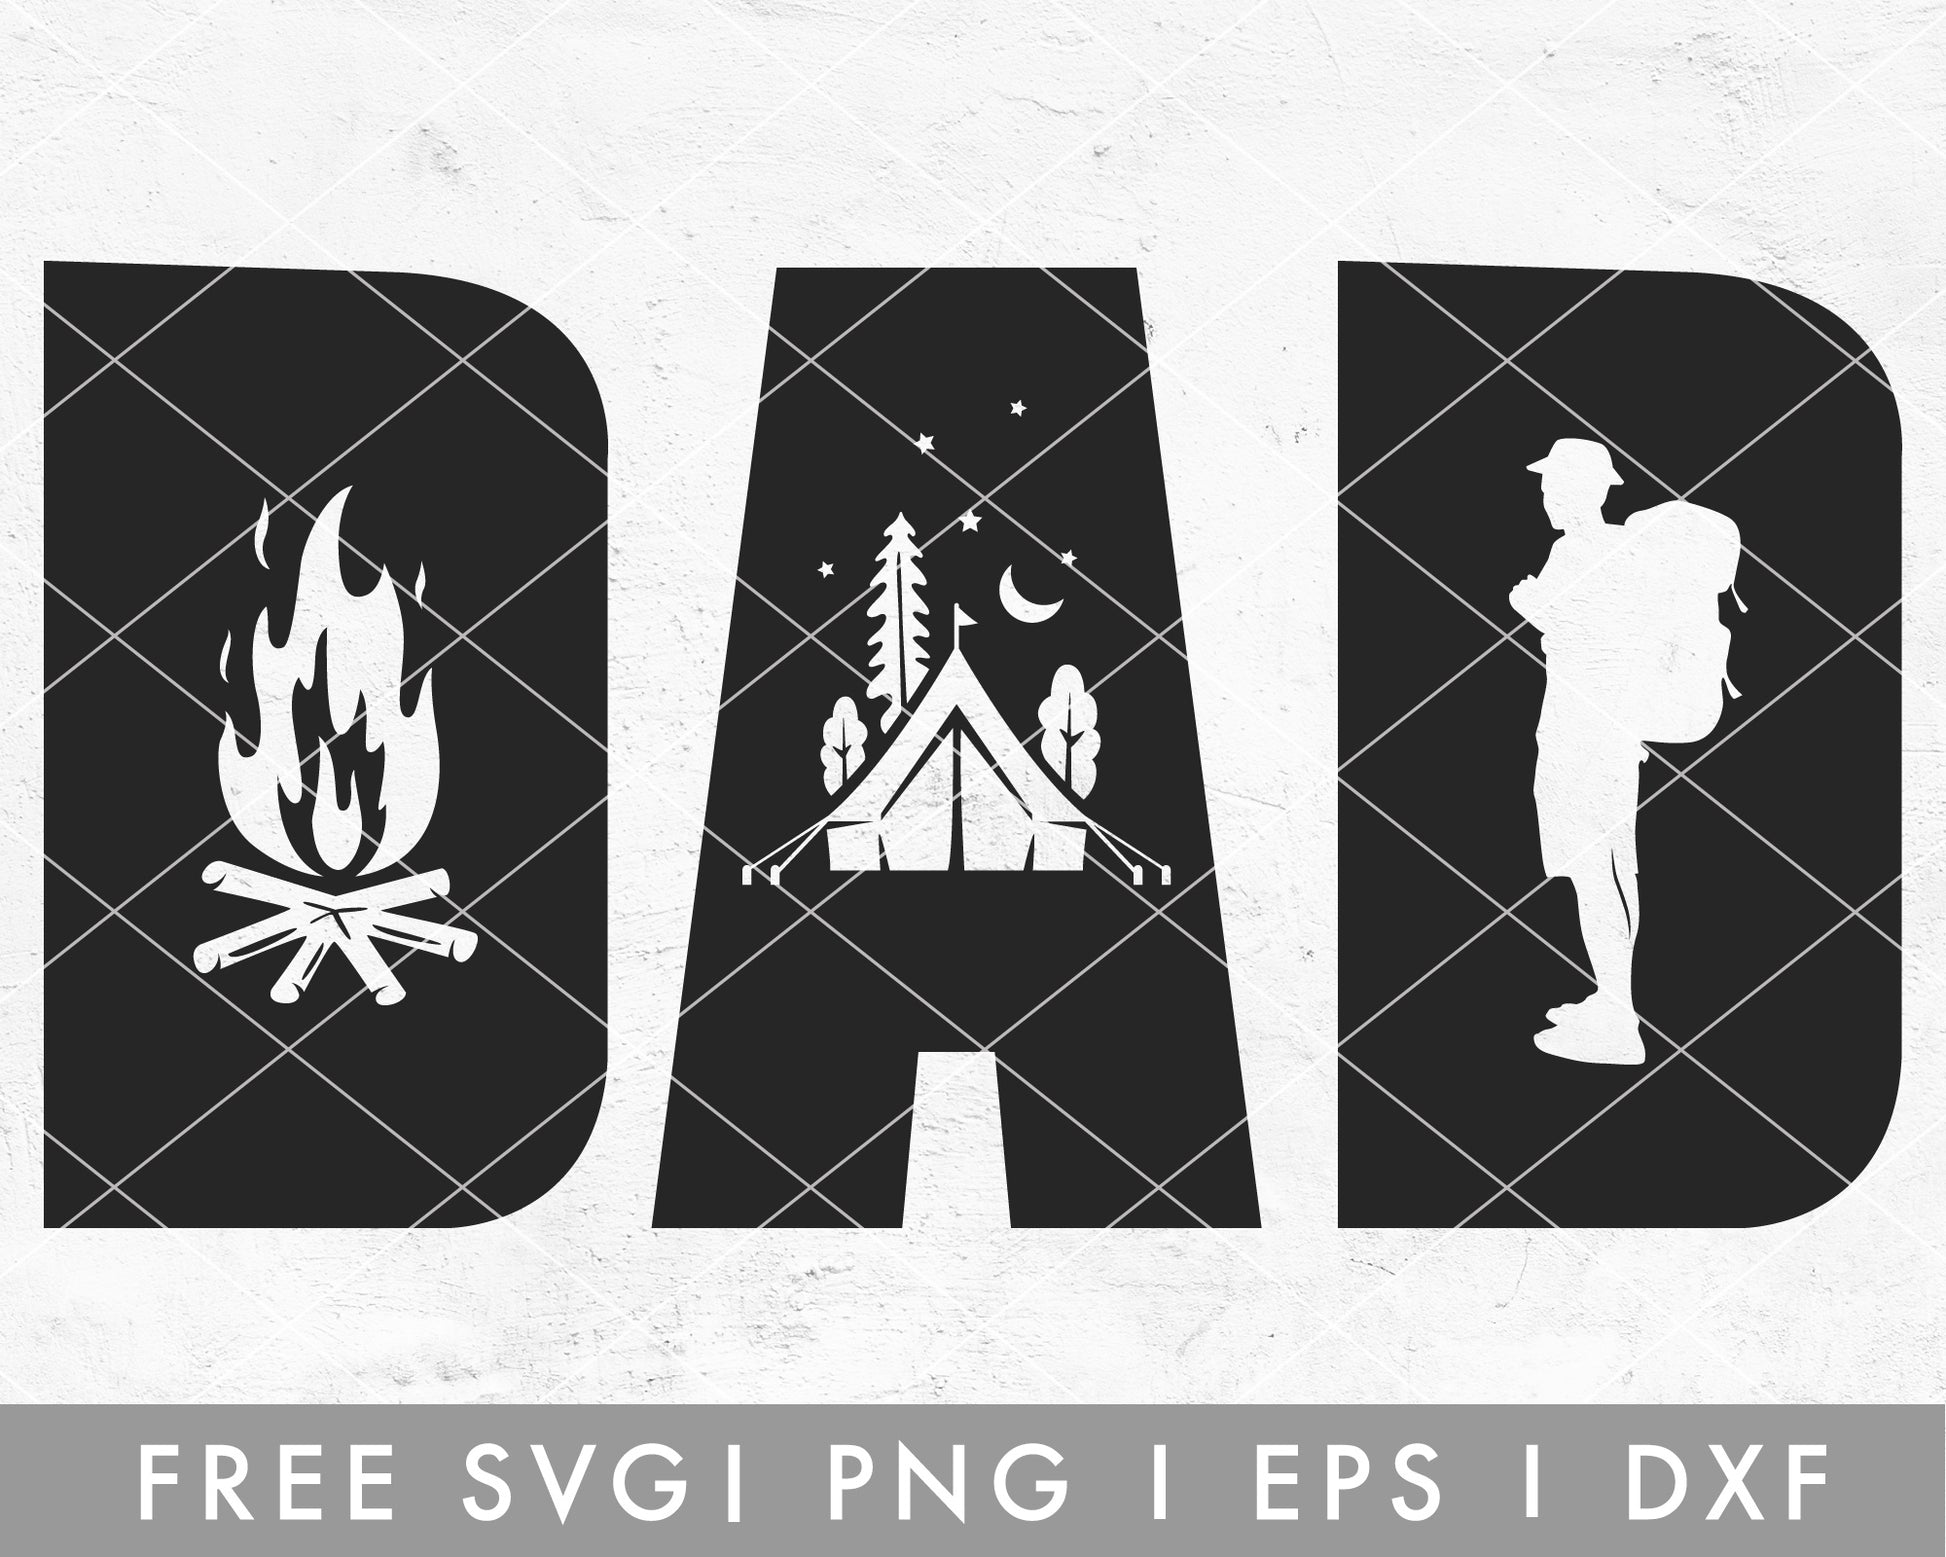 FREE Dad SVG | Camping SVG Cut File for Cricut, Cameo Silhouette | Free SVG Cut File